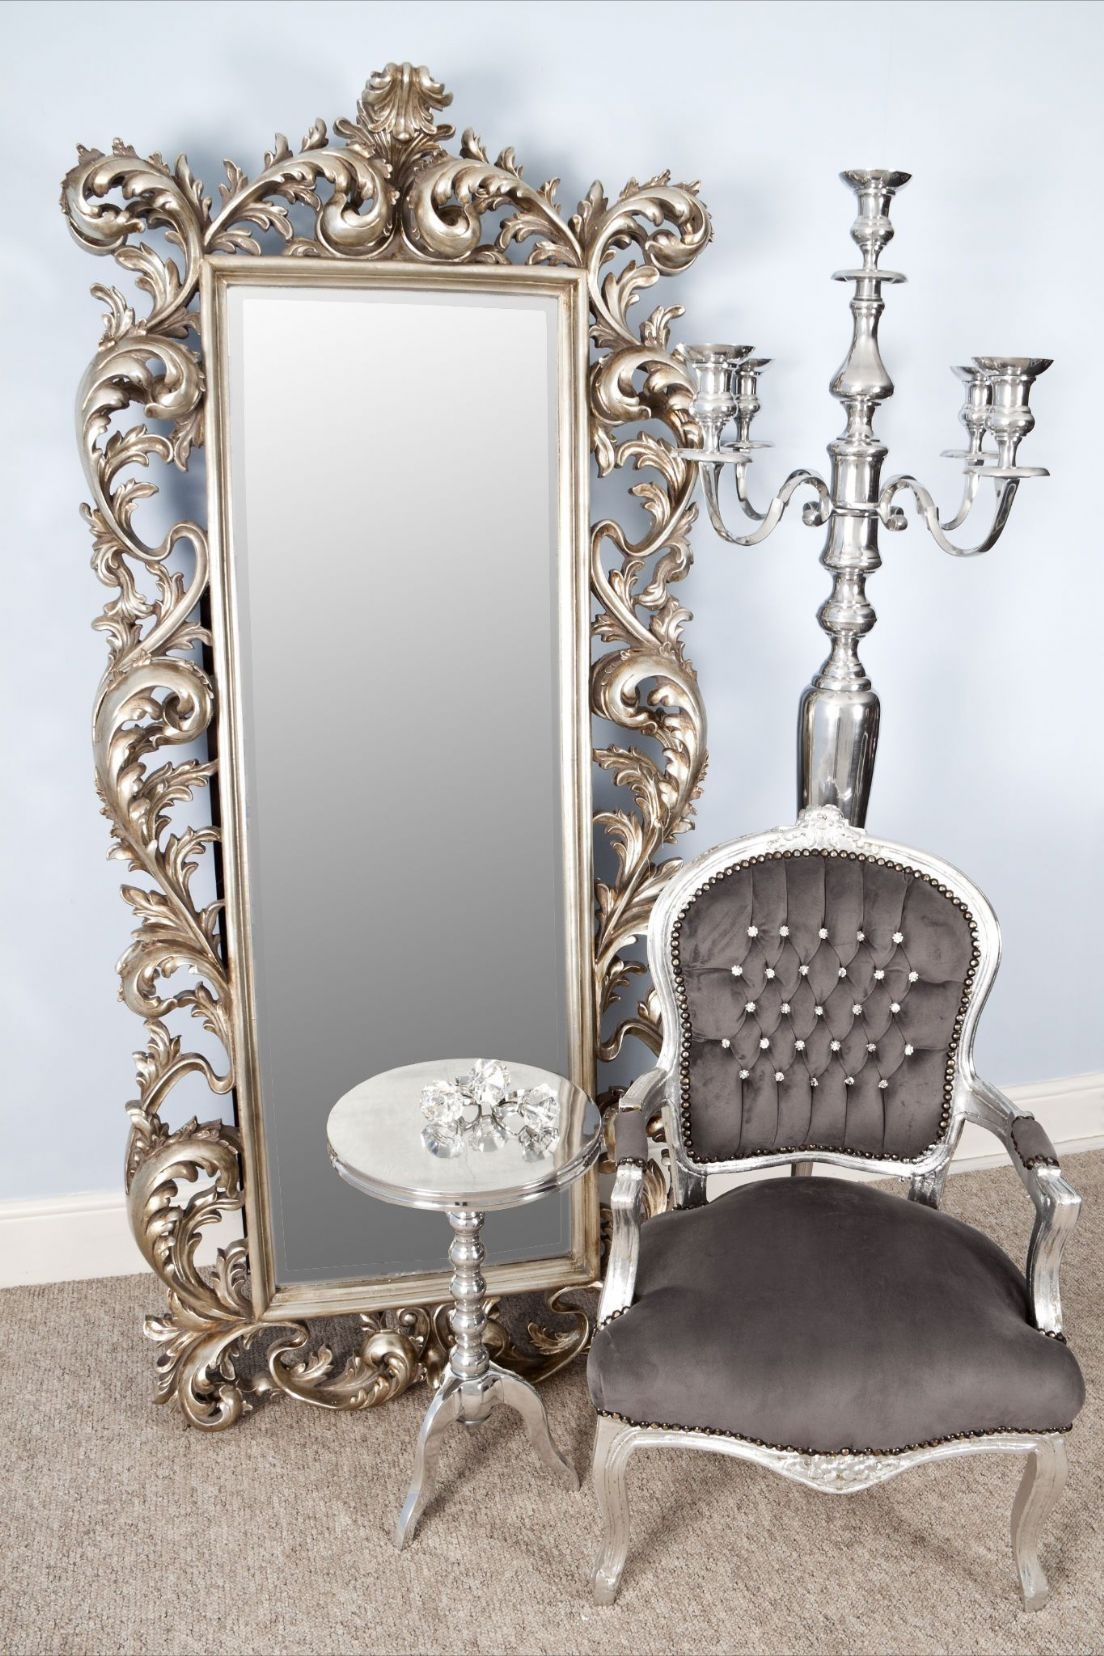 Bedroom Appealing Oversized Mirrors For Home Decoration Ideas Throughout Antique Wall Mirrors Large (View 5 of 15)